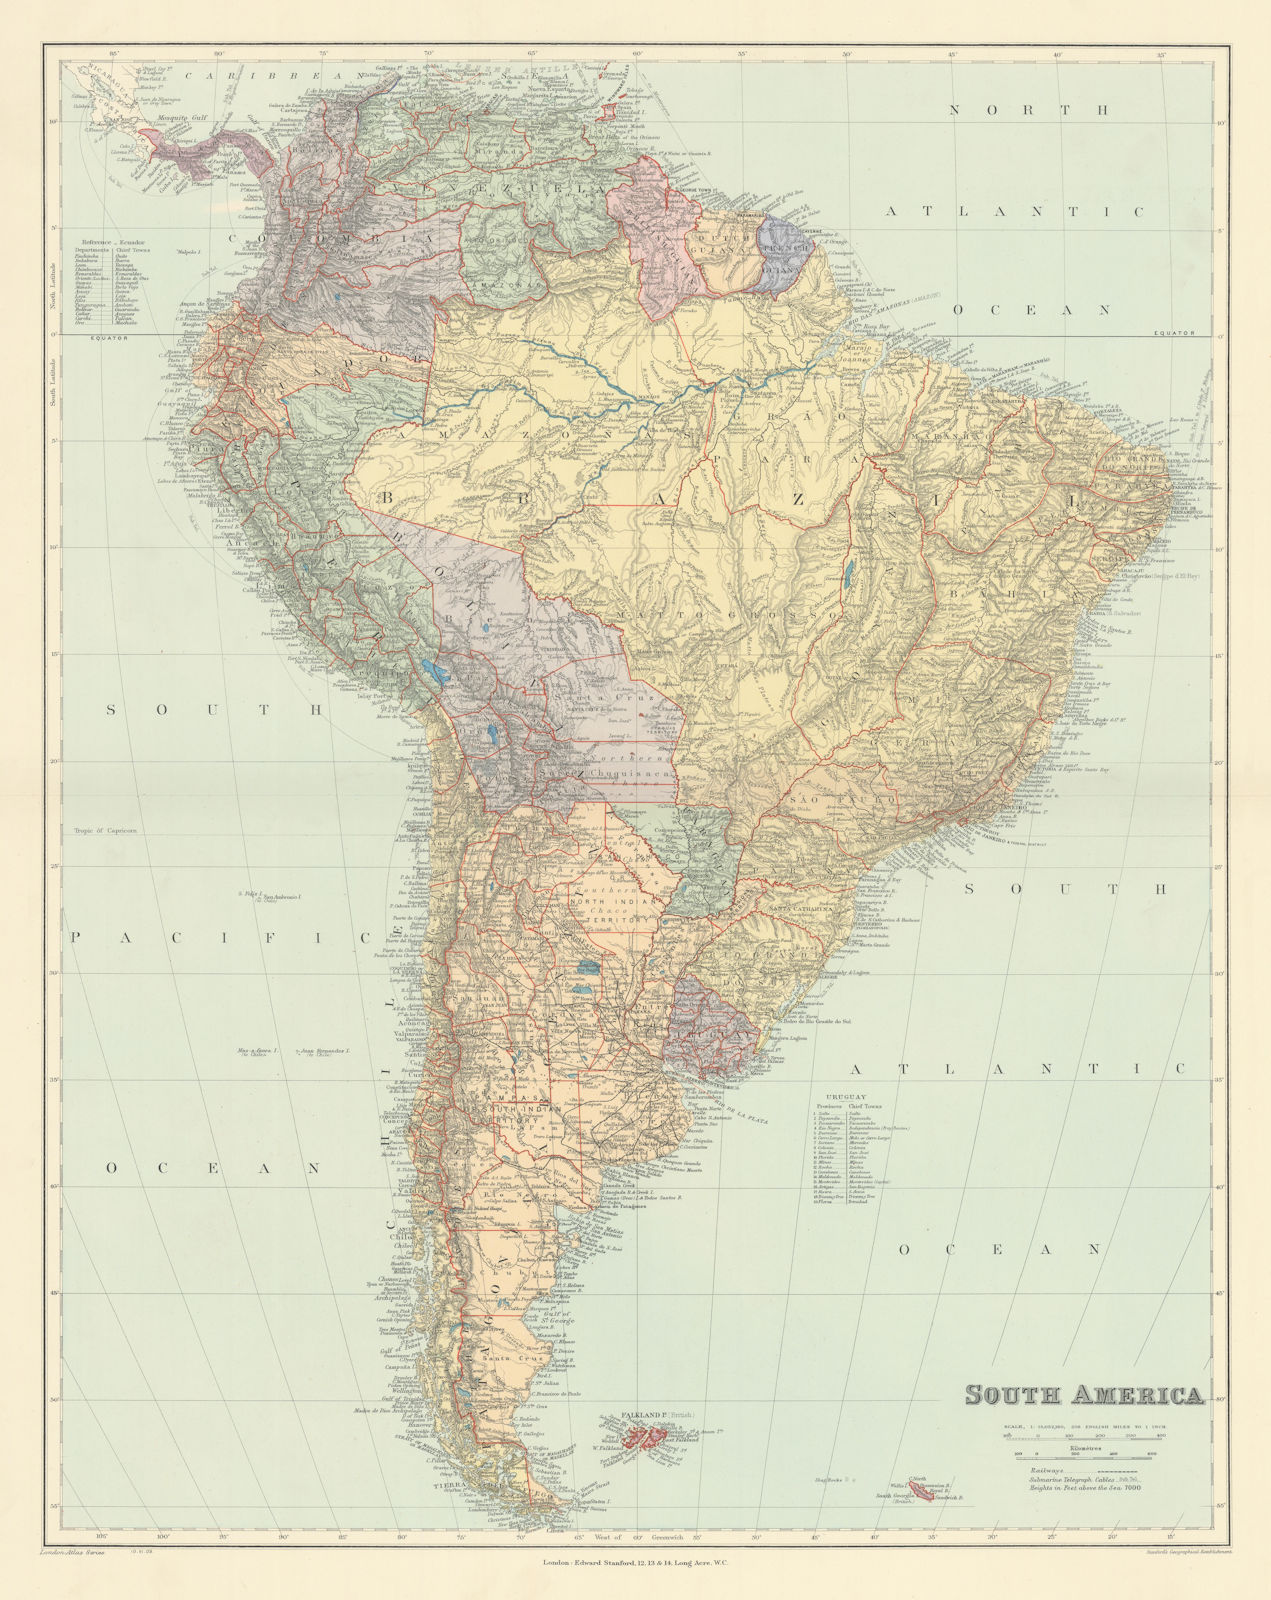 Associate Product South America. Large 64x51cm. STANFORD 1904 old antique vintage map plan chart